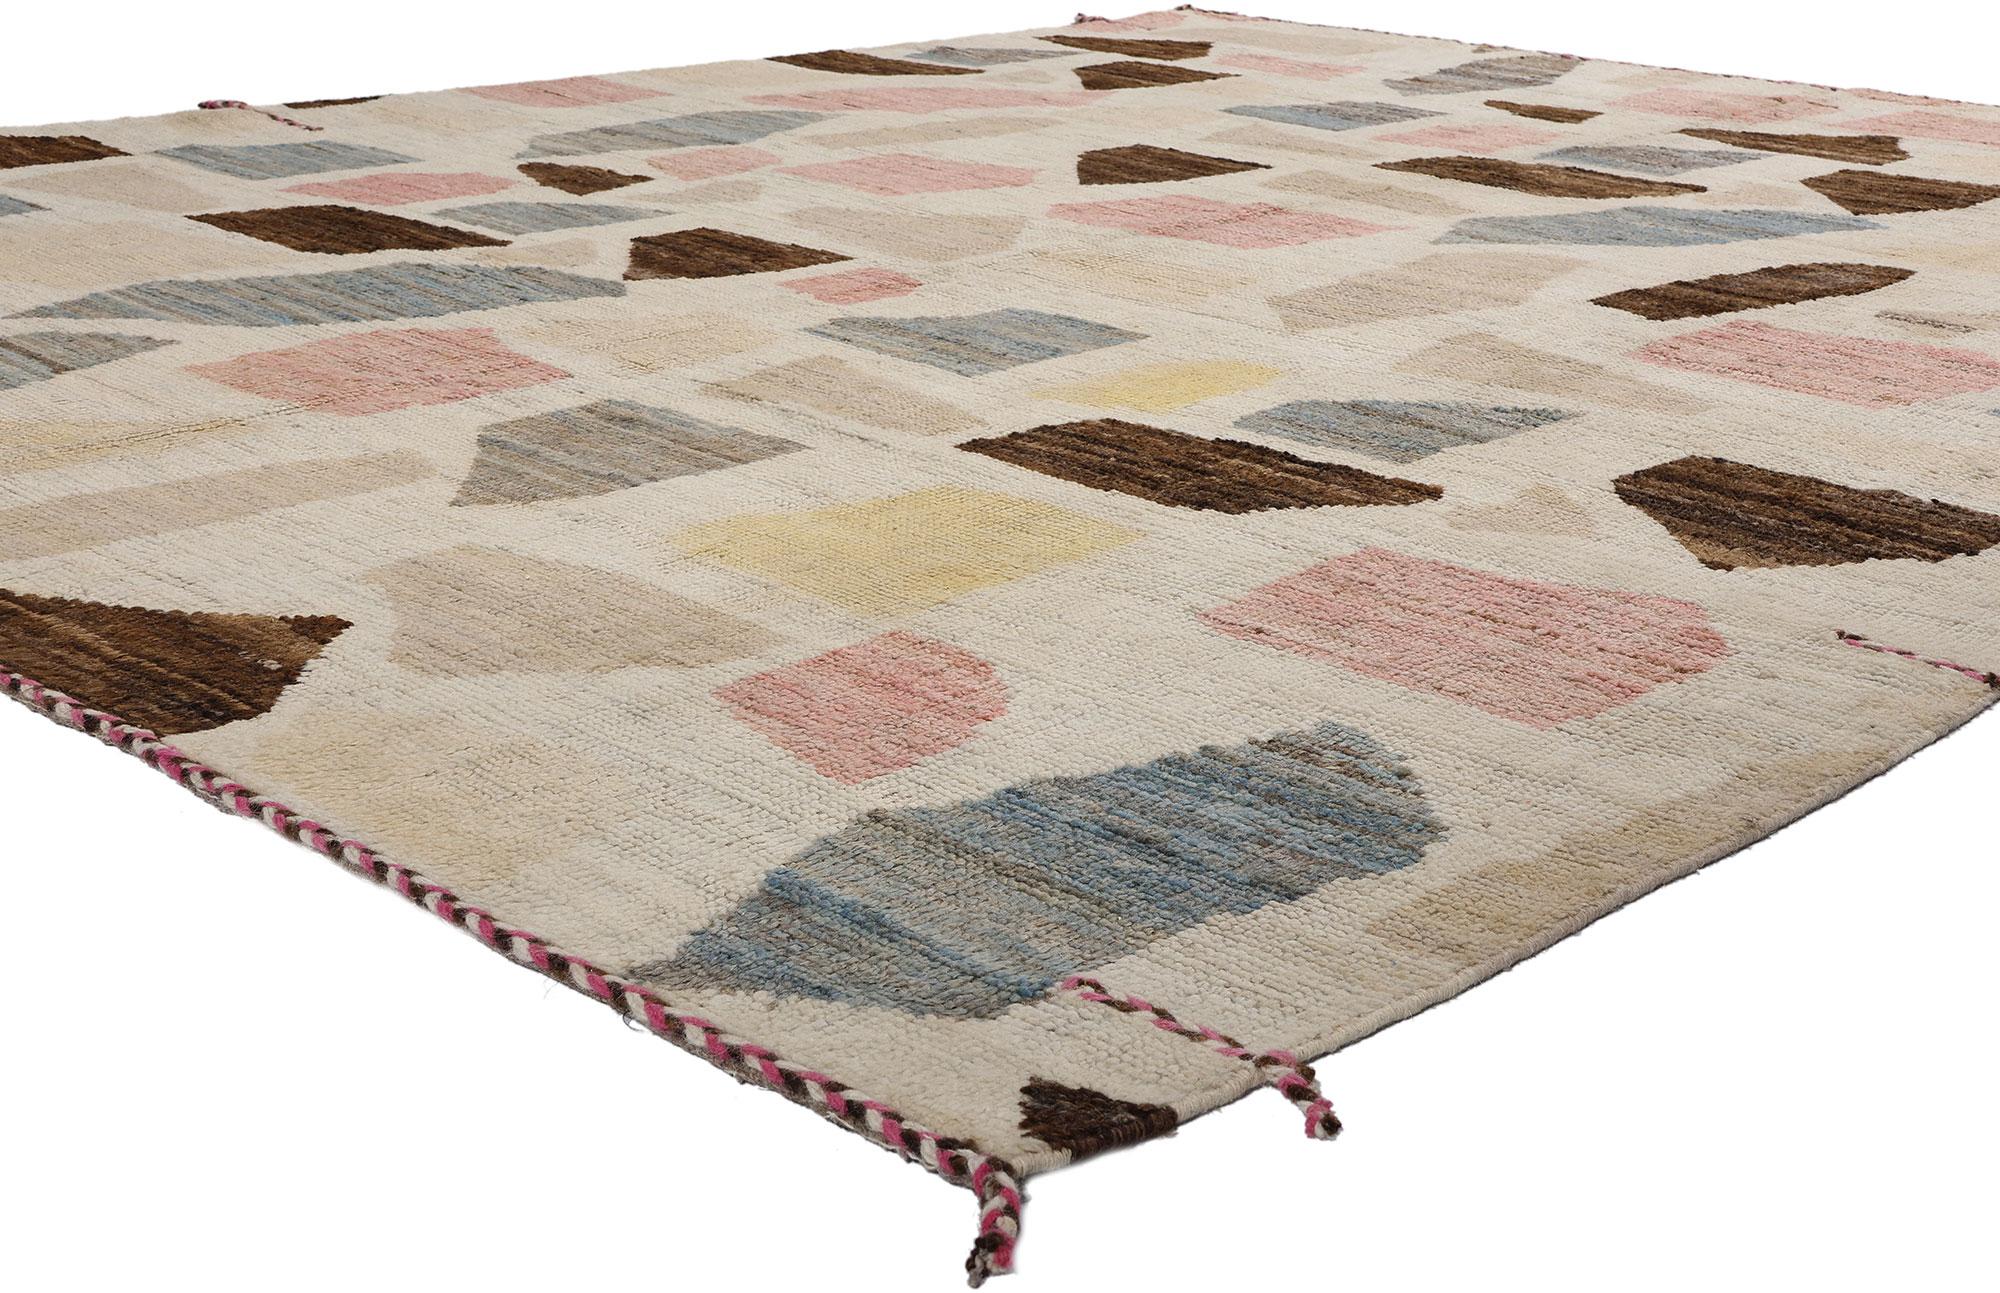 81060 Organic Modern Moroccan Terrazzo Rug, 08'03 x 10'02. Step into a world where Mid-Century Modern sophistication meets Bohemian charm with our hand-knotted wool 